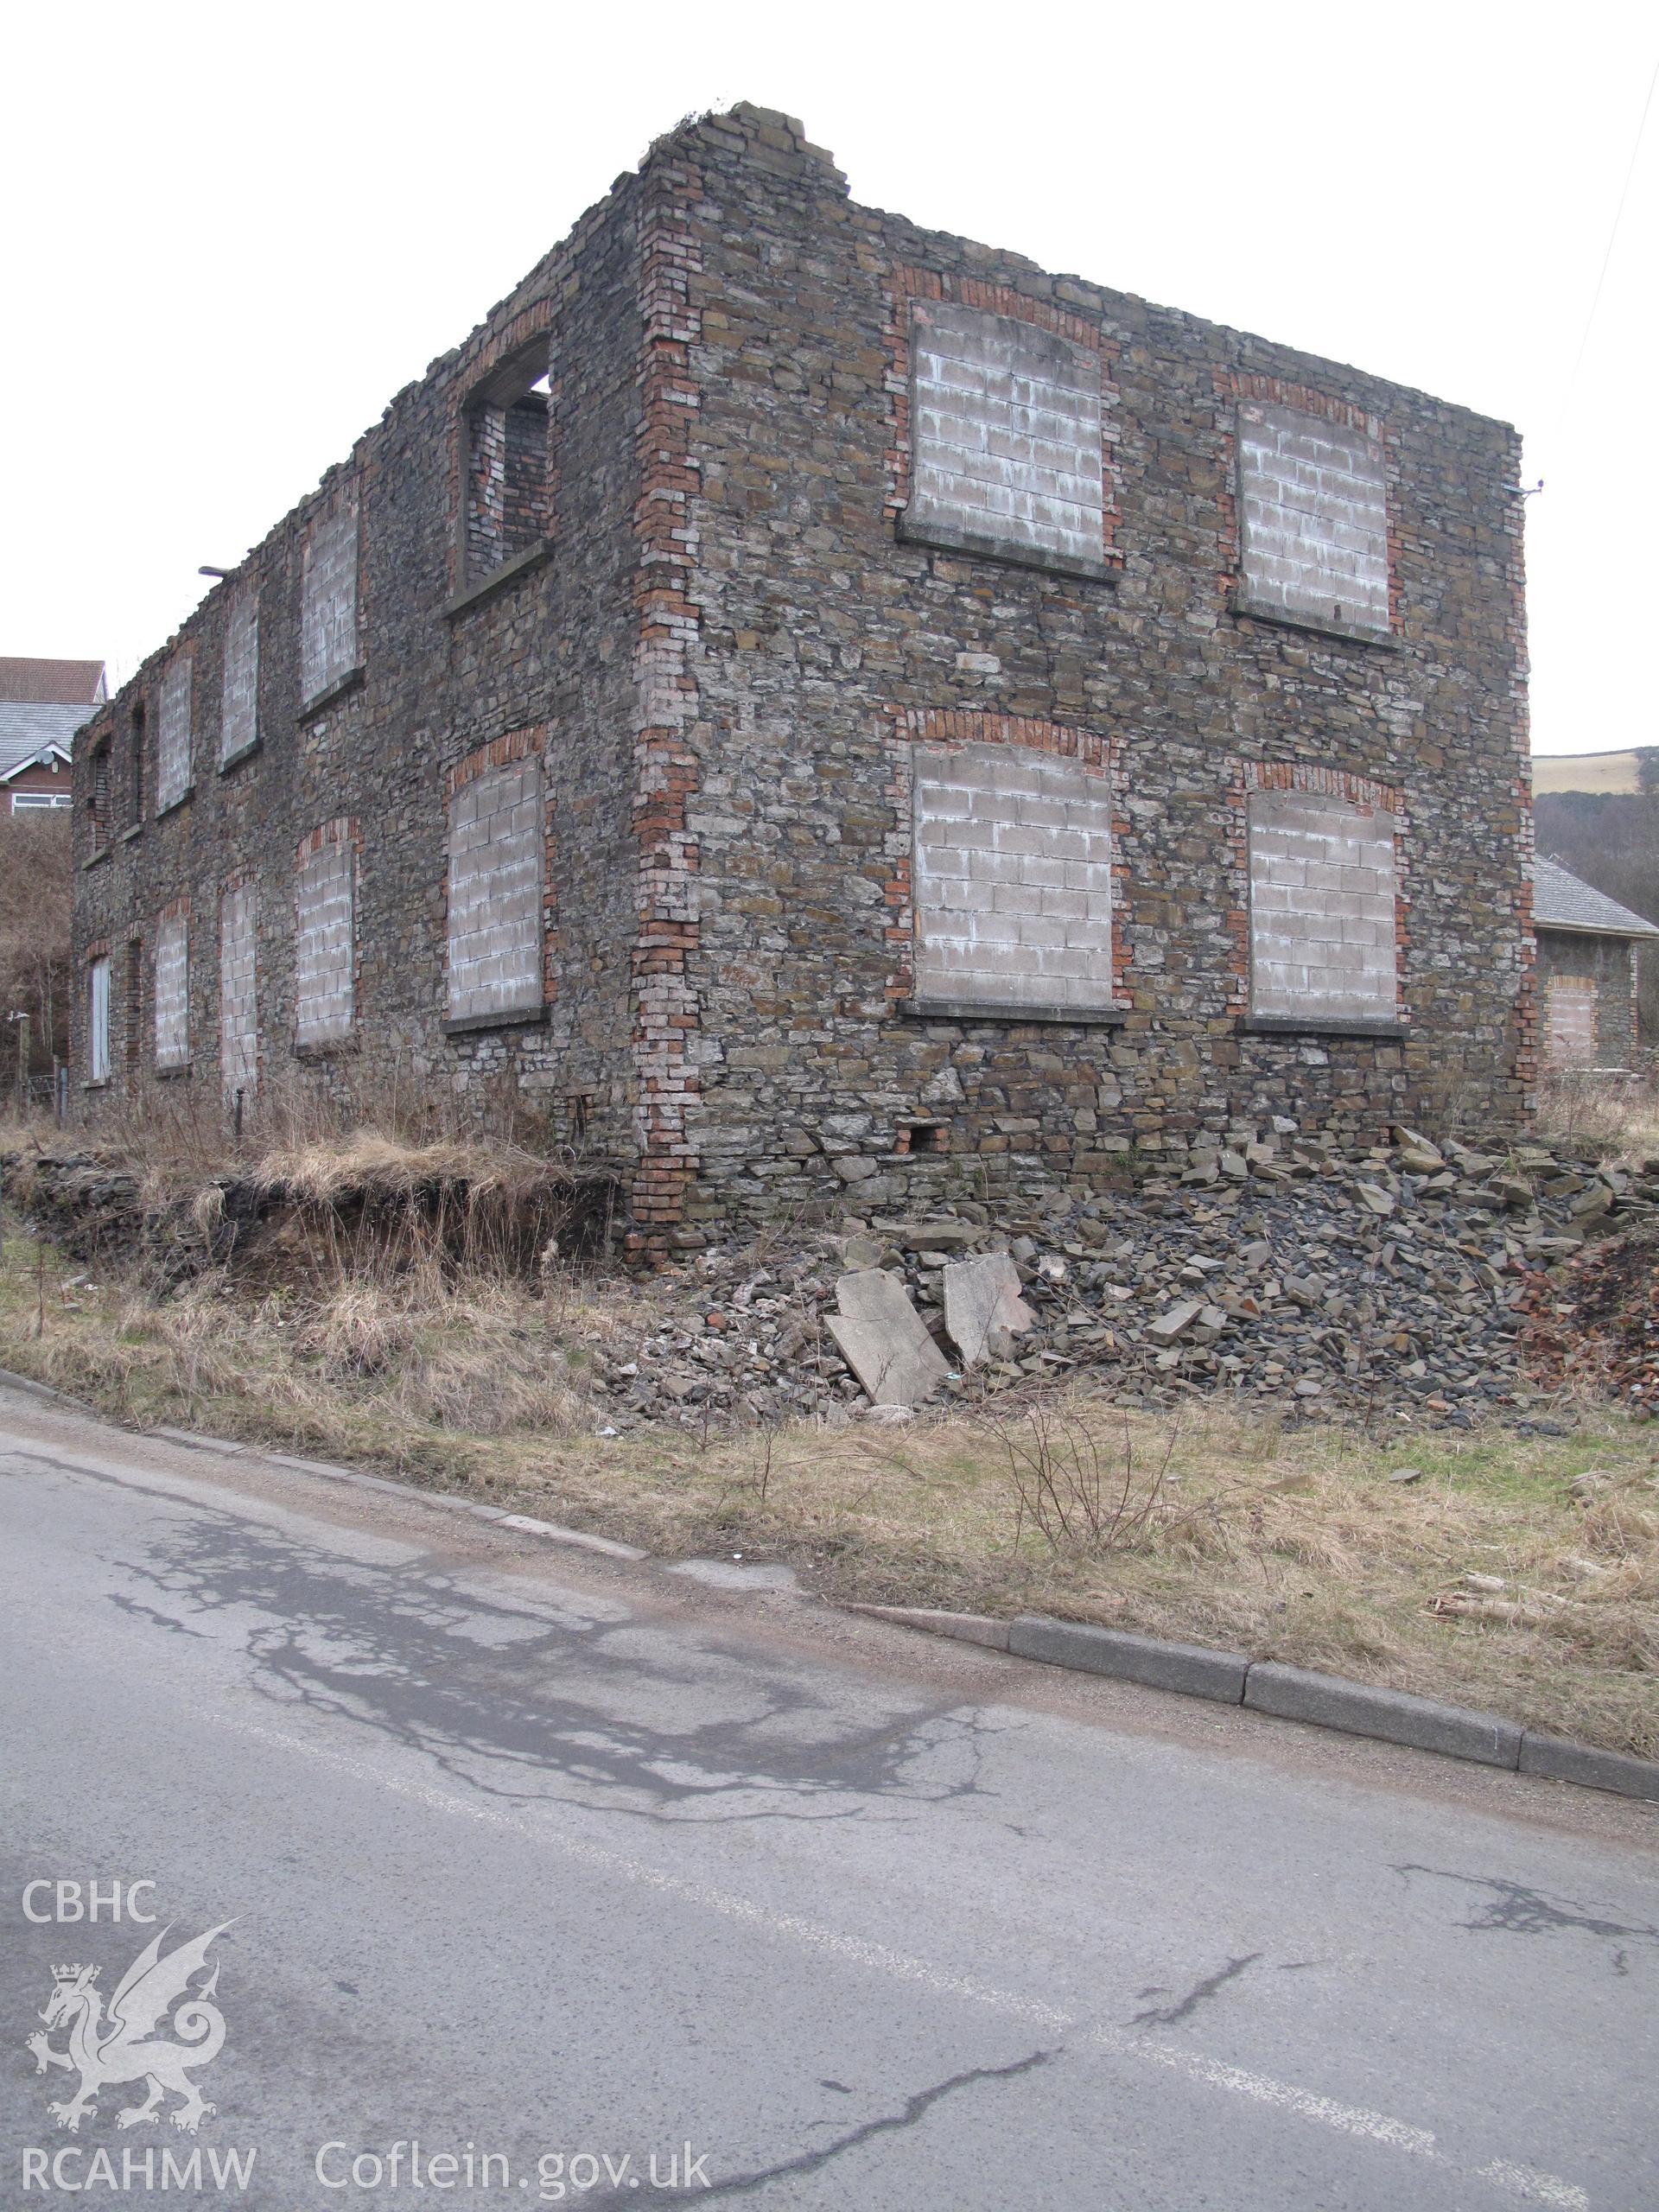 View of Universal Colliery Offices, Senghenydd, from the southeast, taken by Brian Malaws on 12 February 2010.